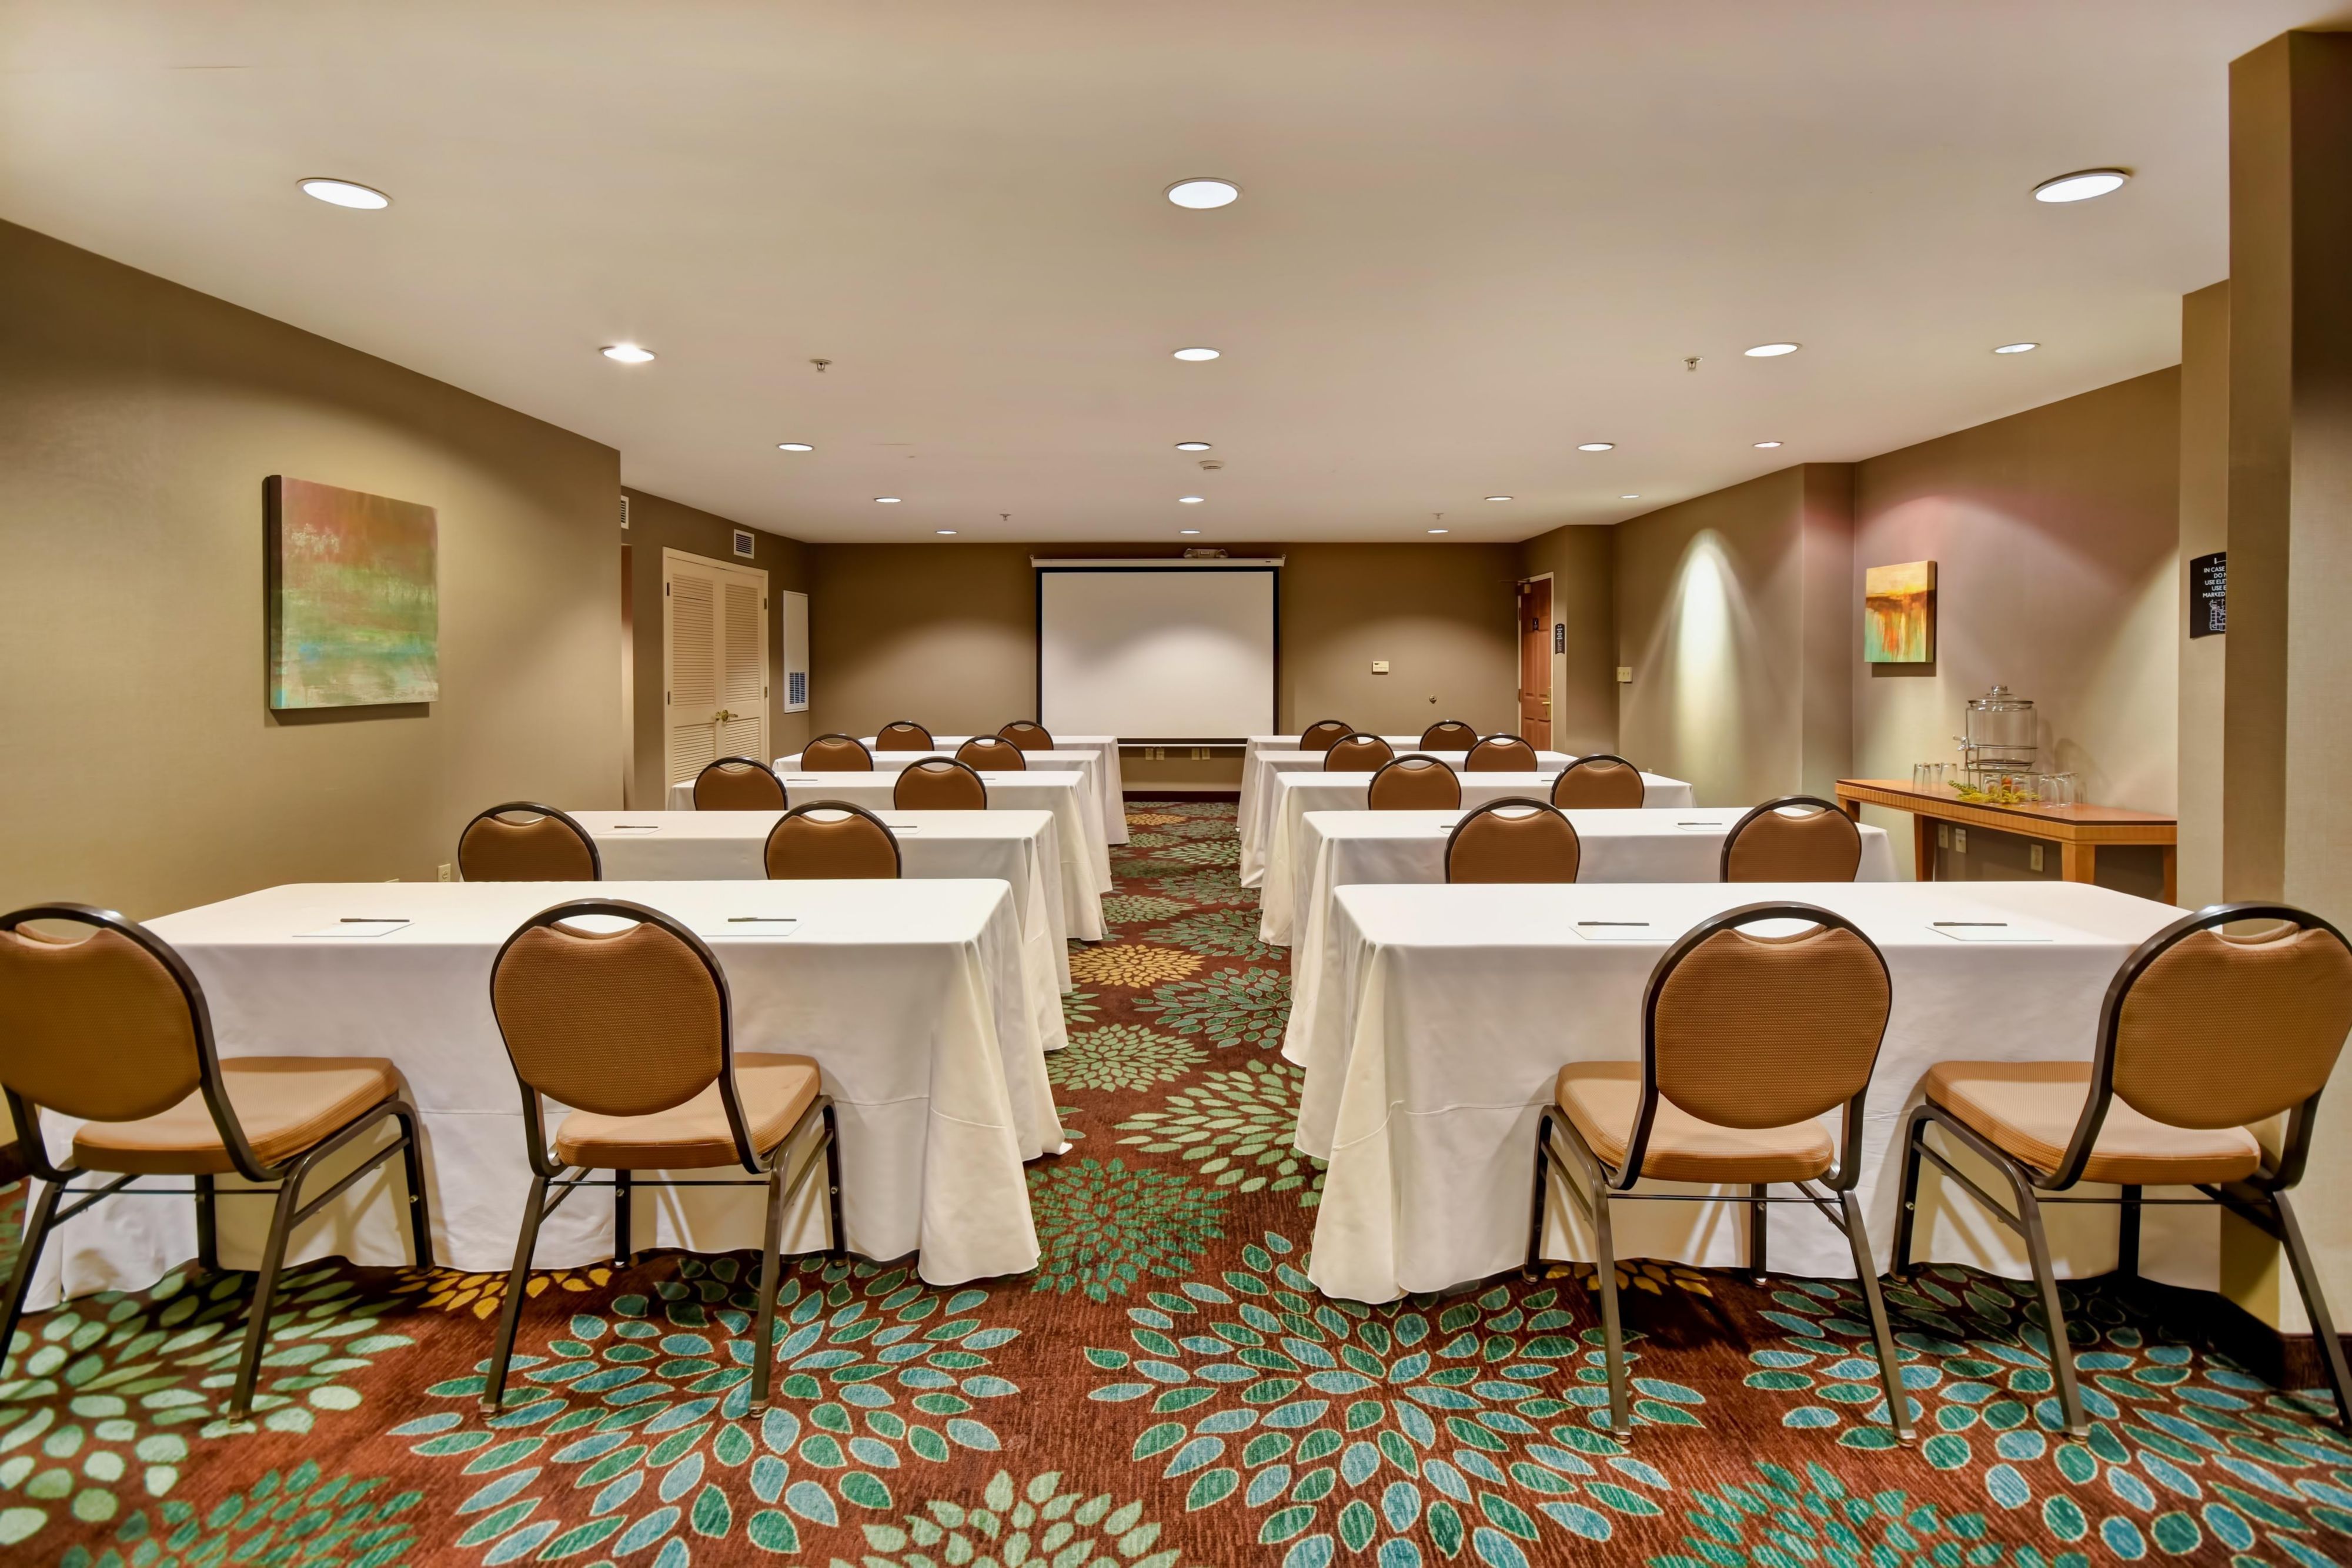 Enjoy over 1,200 square feet of meeting space. Our Capitol Boardroom can accommodate up to ten people in a boardroom setting while the Wisconsin Room can accommodate up to 40 attendees in a variety of room set-ups.